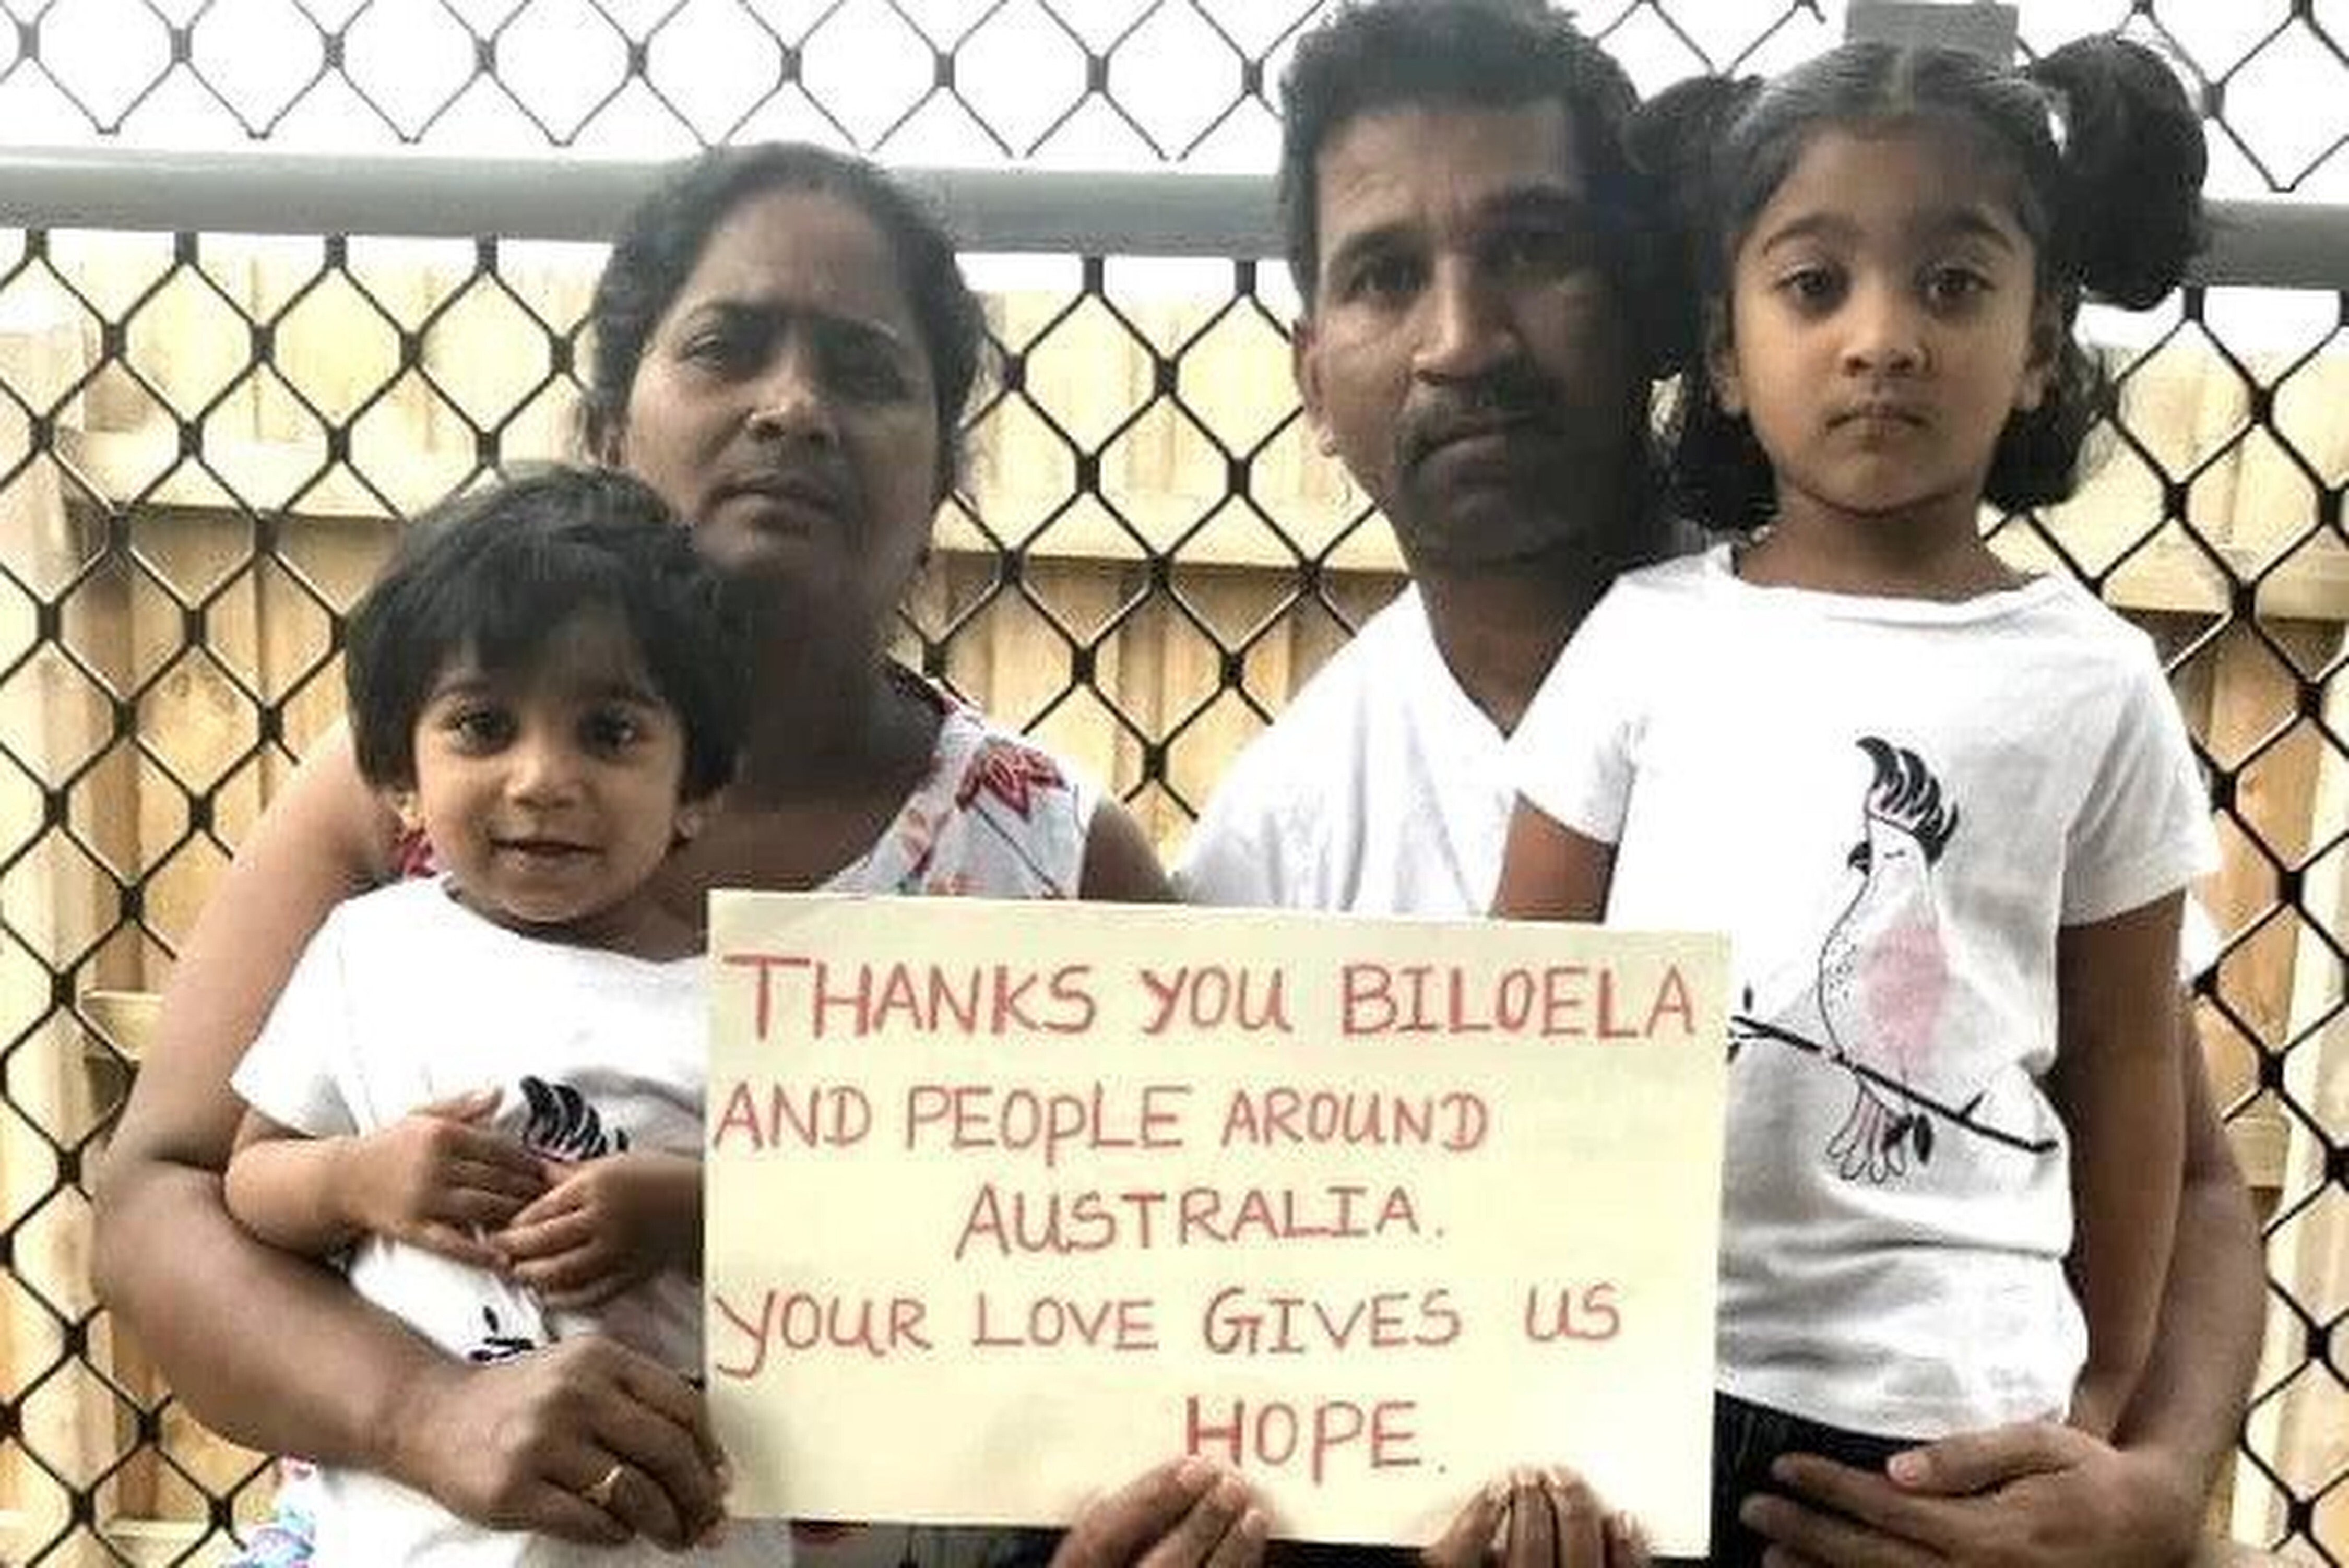 Priya and Nades Murugappan who both fled from Sri Lanka, and their daughters, who were born in Australia. The government has reportedly spent over A$6 million (US$4.3 million) on detaining and trying to deport them. Photo: Handout